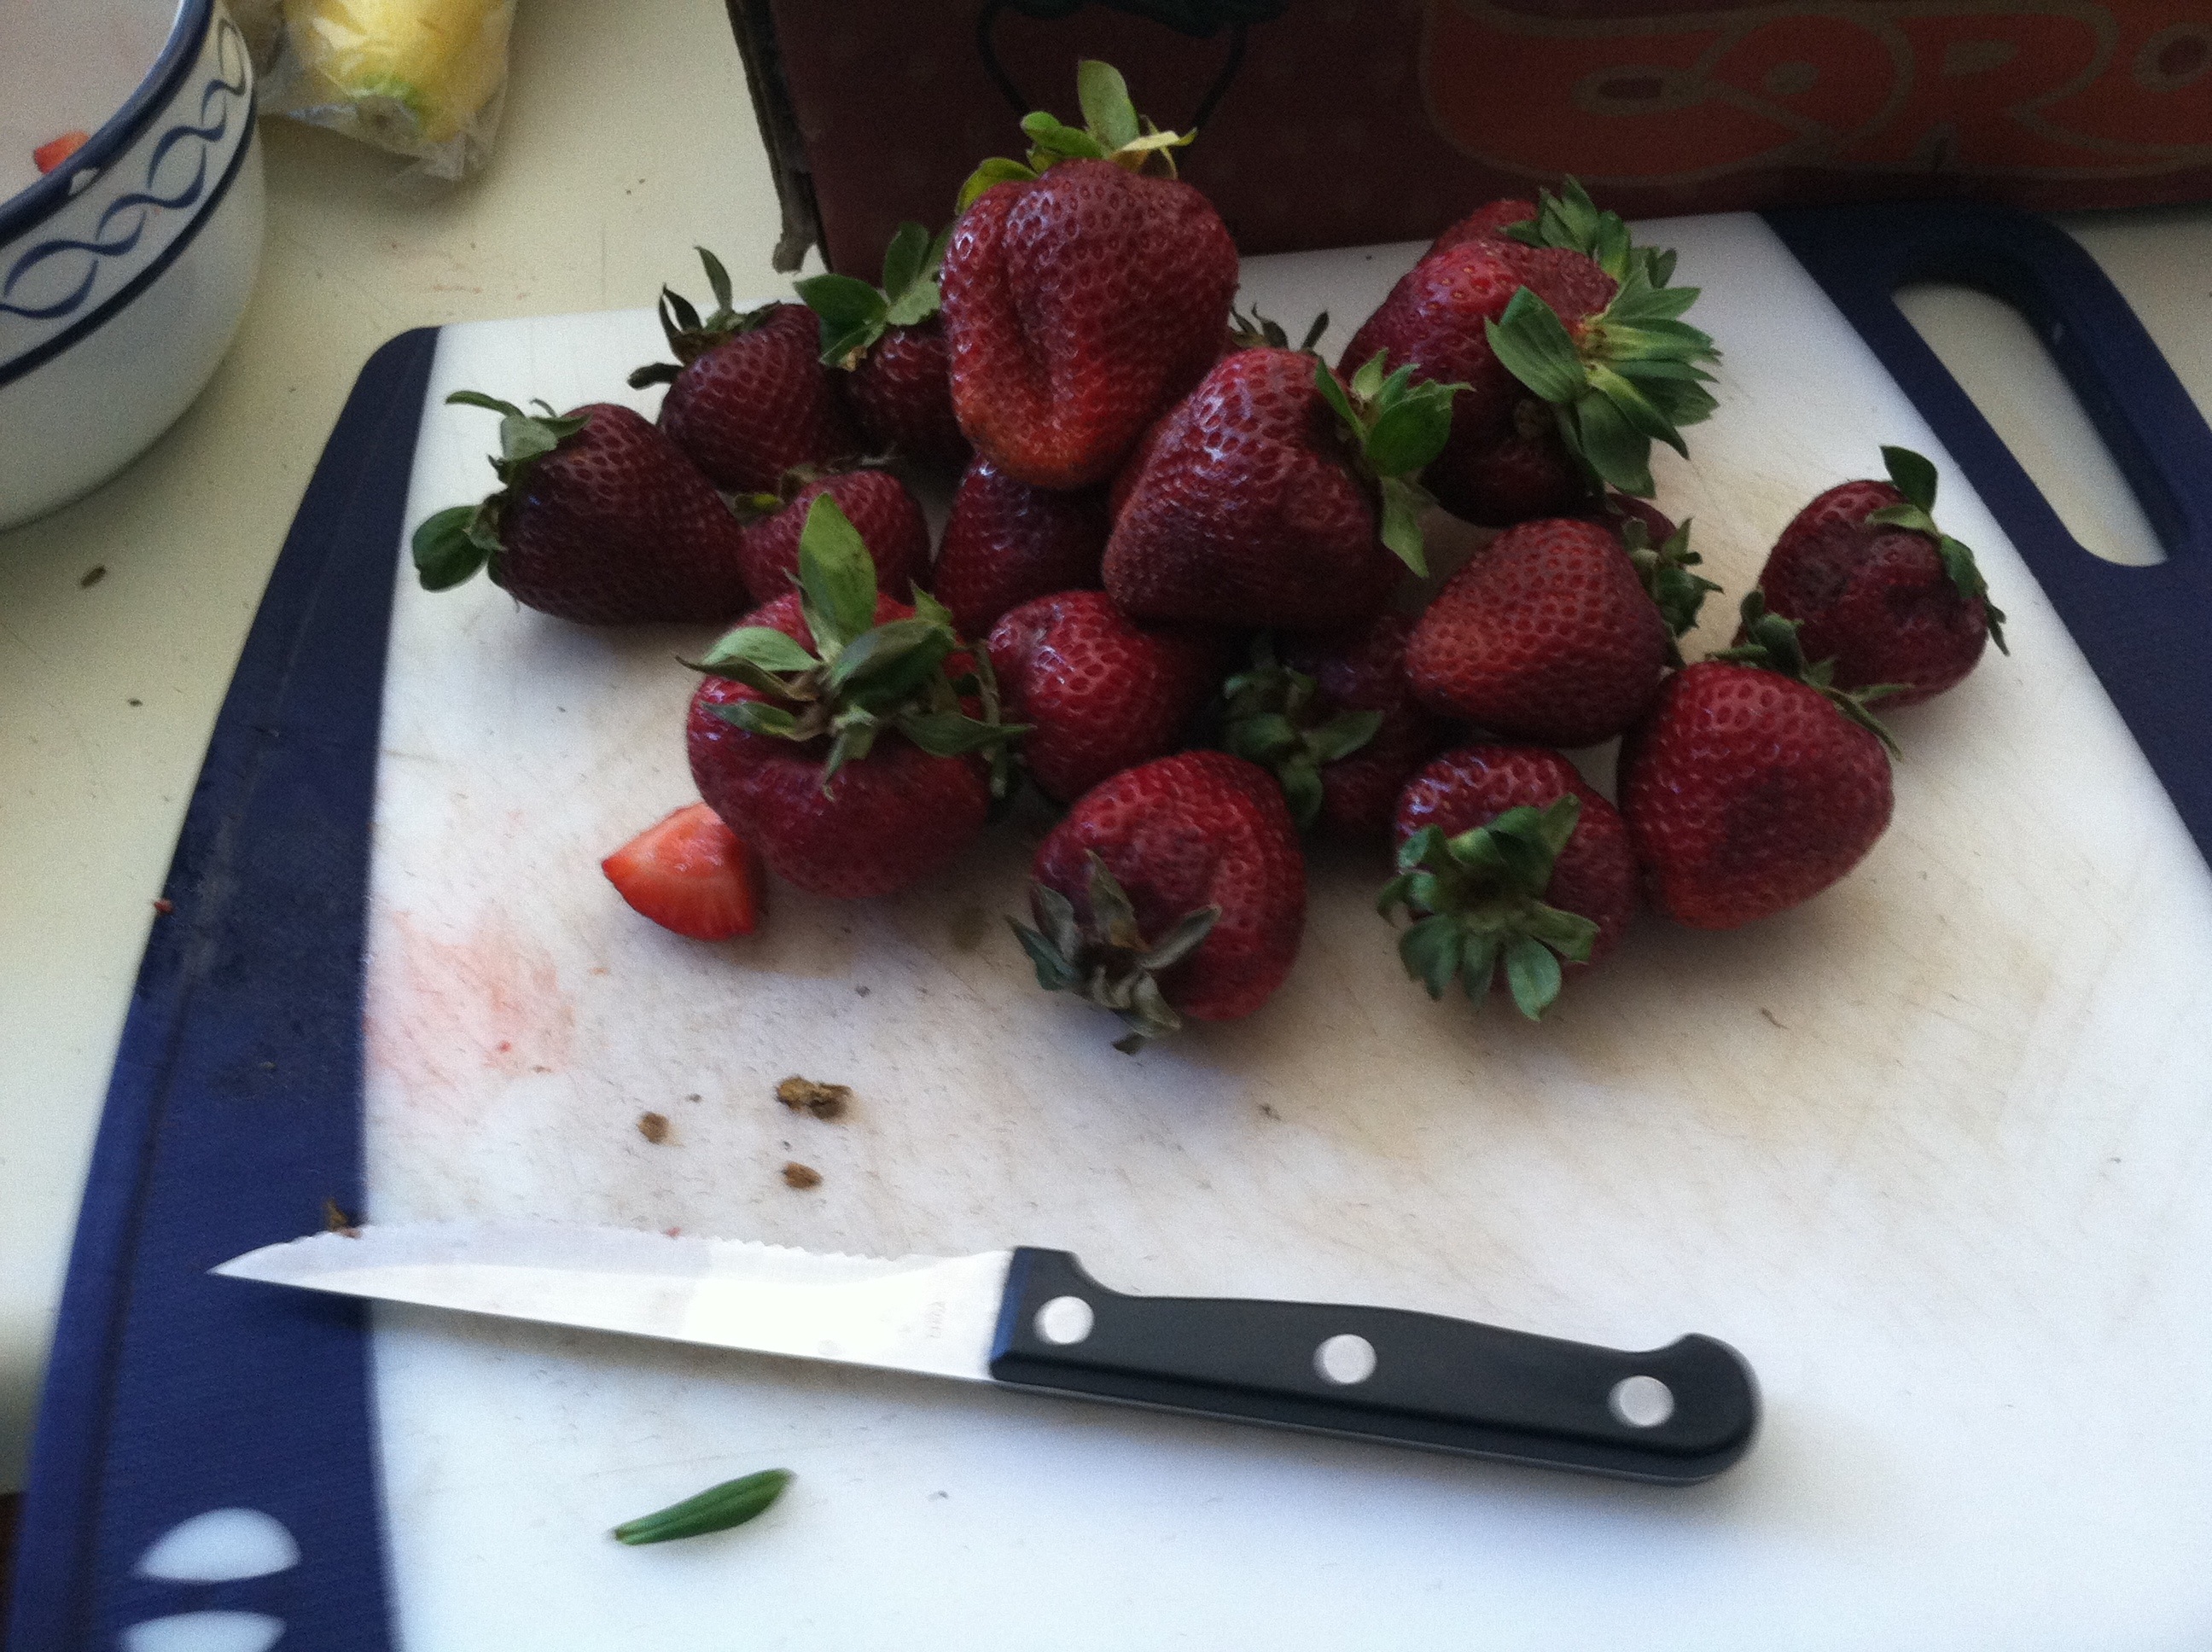 My Saturday afternoon was spent cutting strawberries